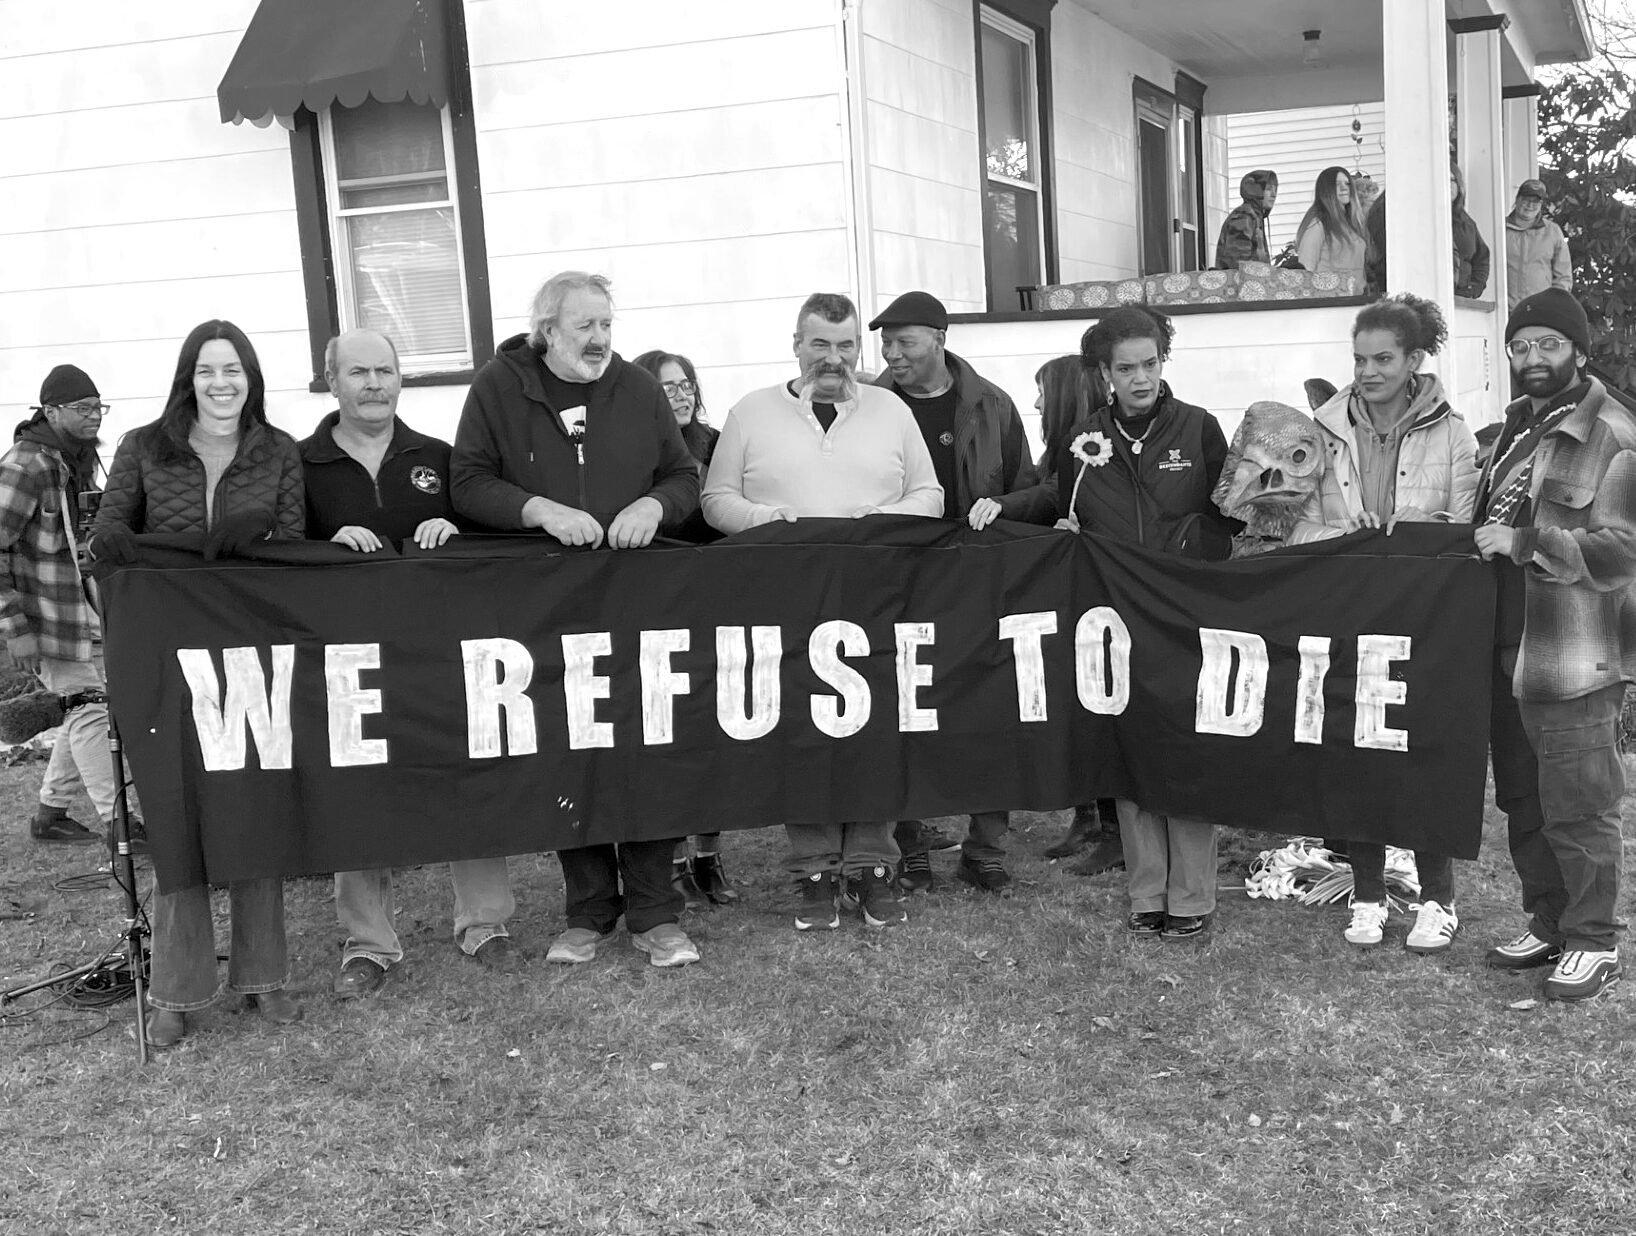 Seven people gather on a lawn on the side of a white house, holding a black banner that reads "WE REFUSE TO DIE."